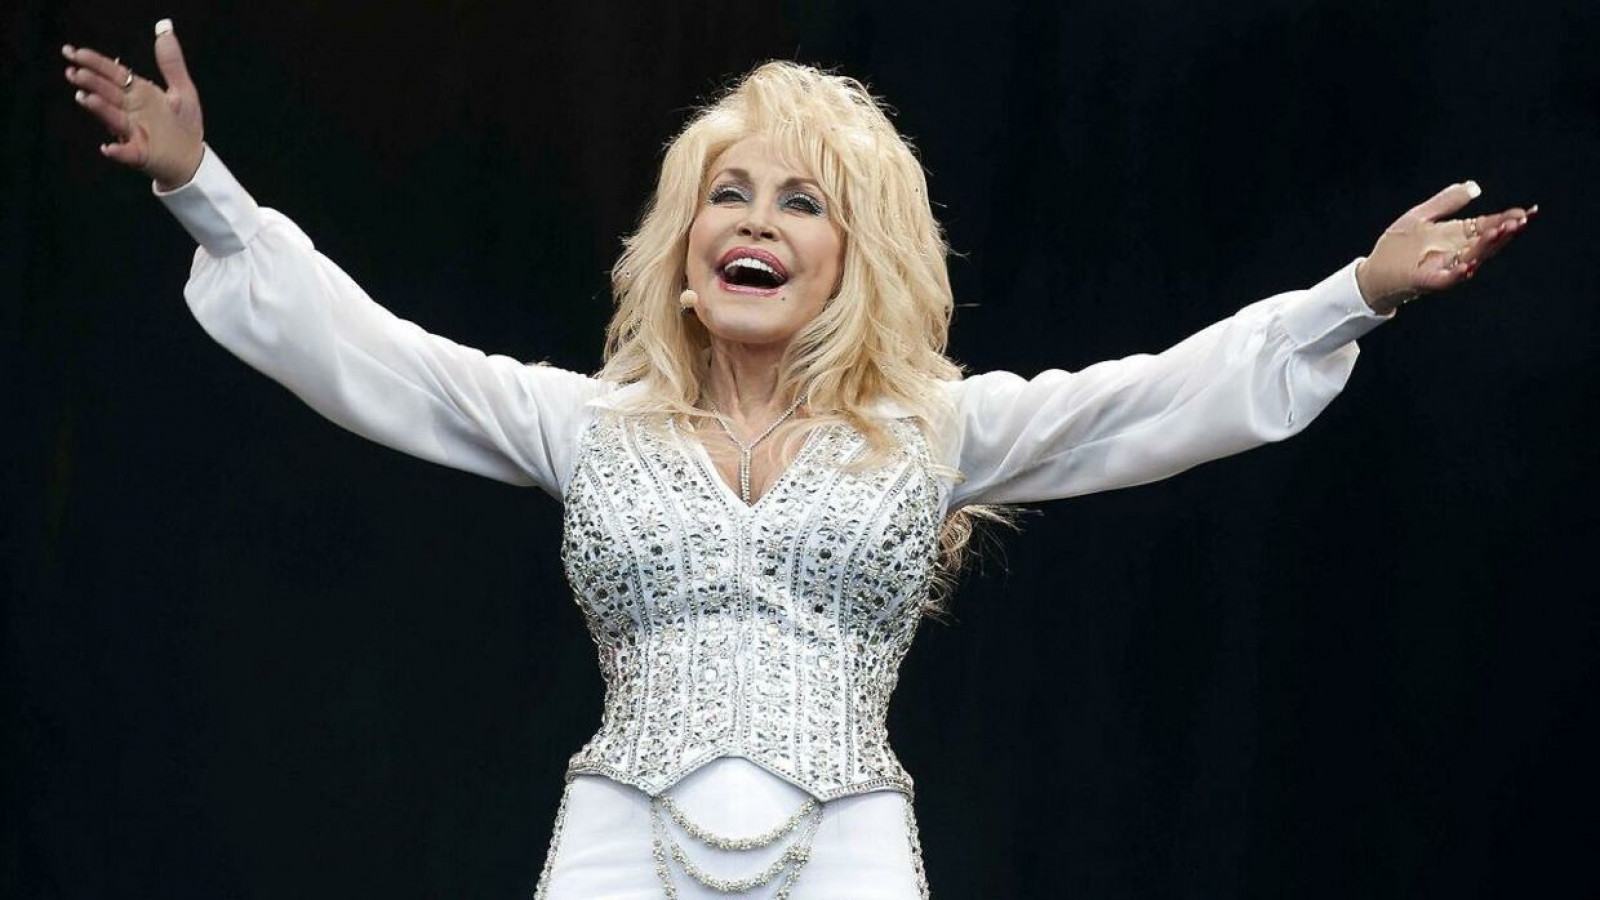 Cover image for Why Dolly Parton may want to wait before selling her catalogue